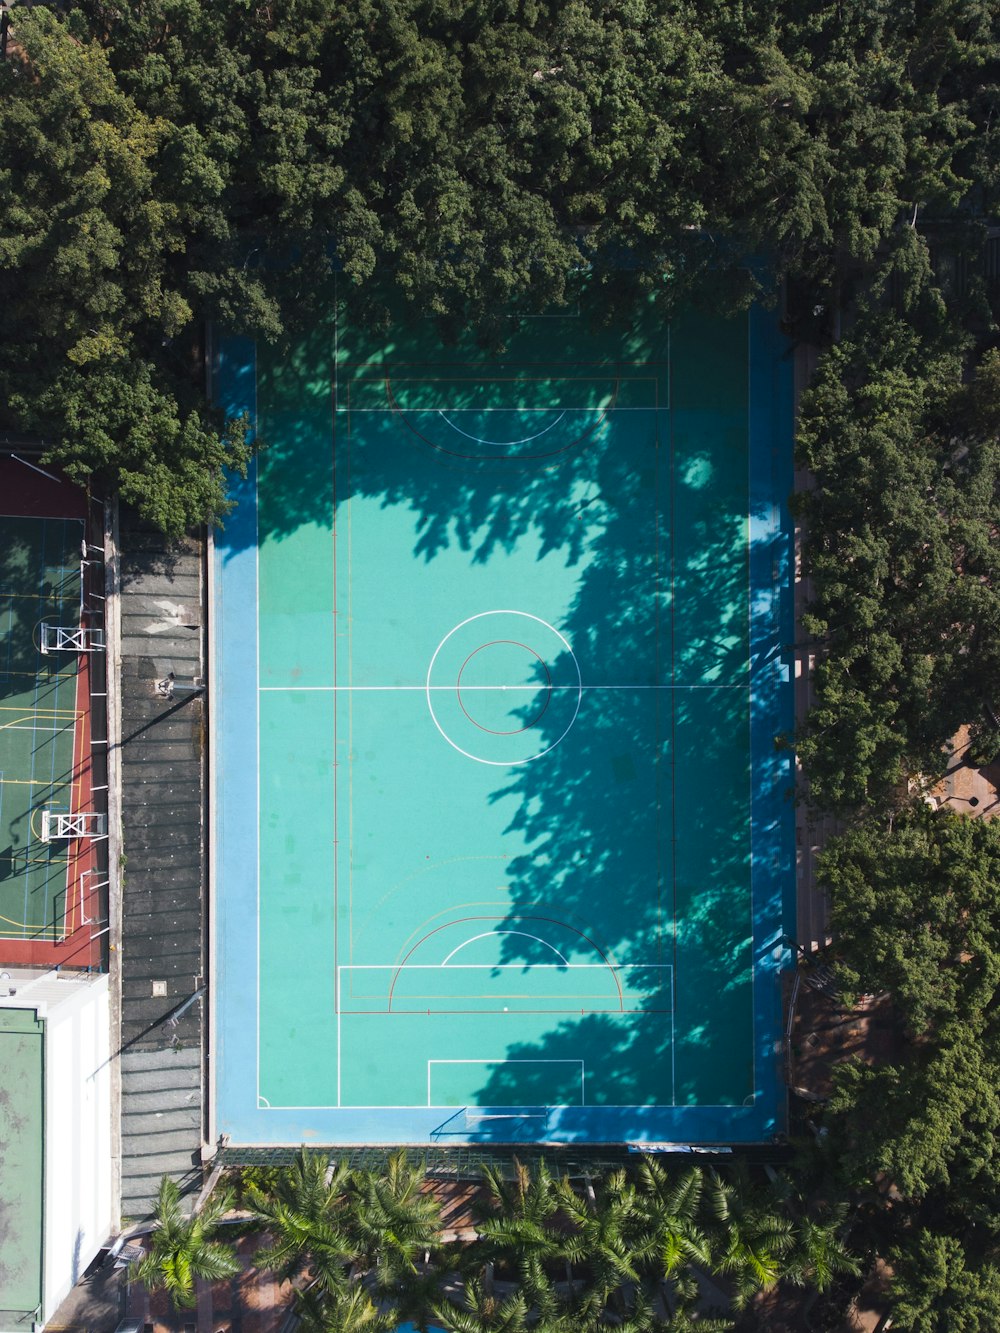 blue and white basketball court